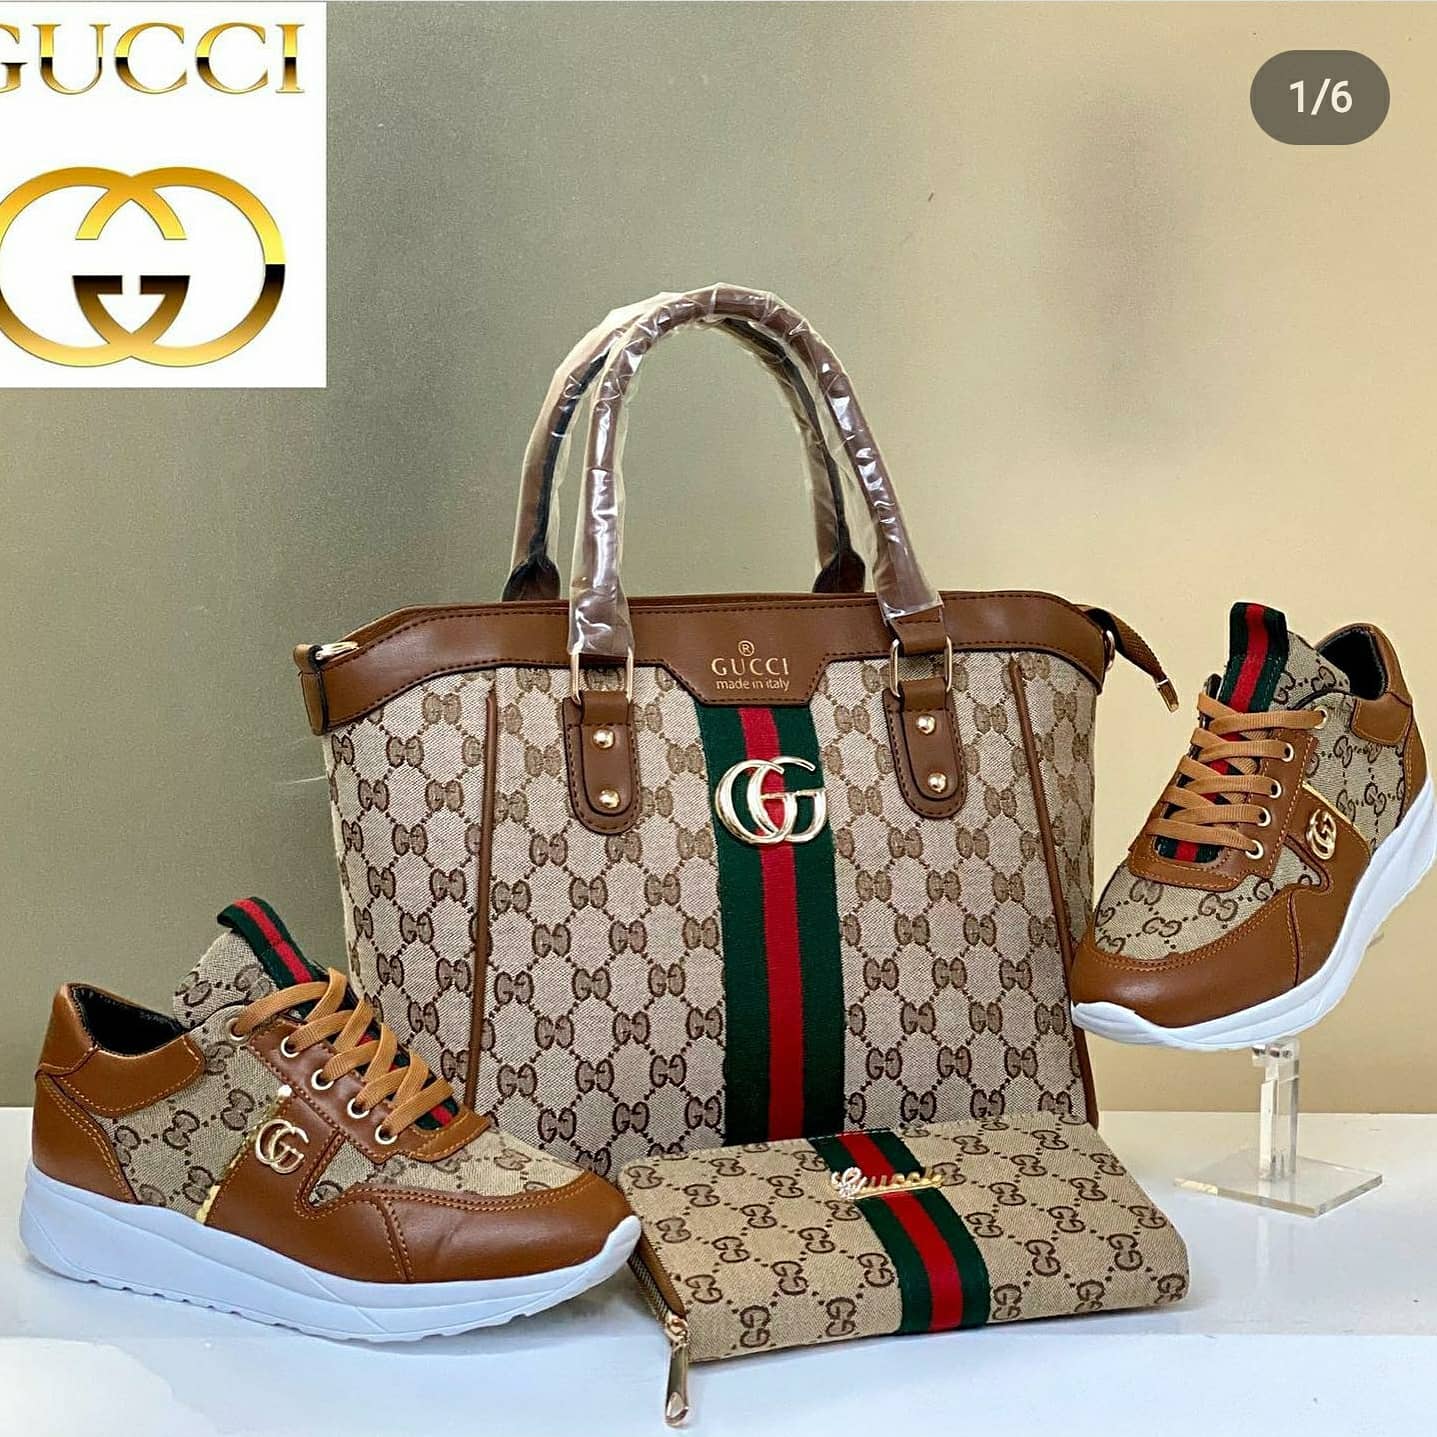 Gucci luxurious sneakers